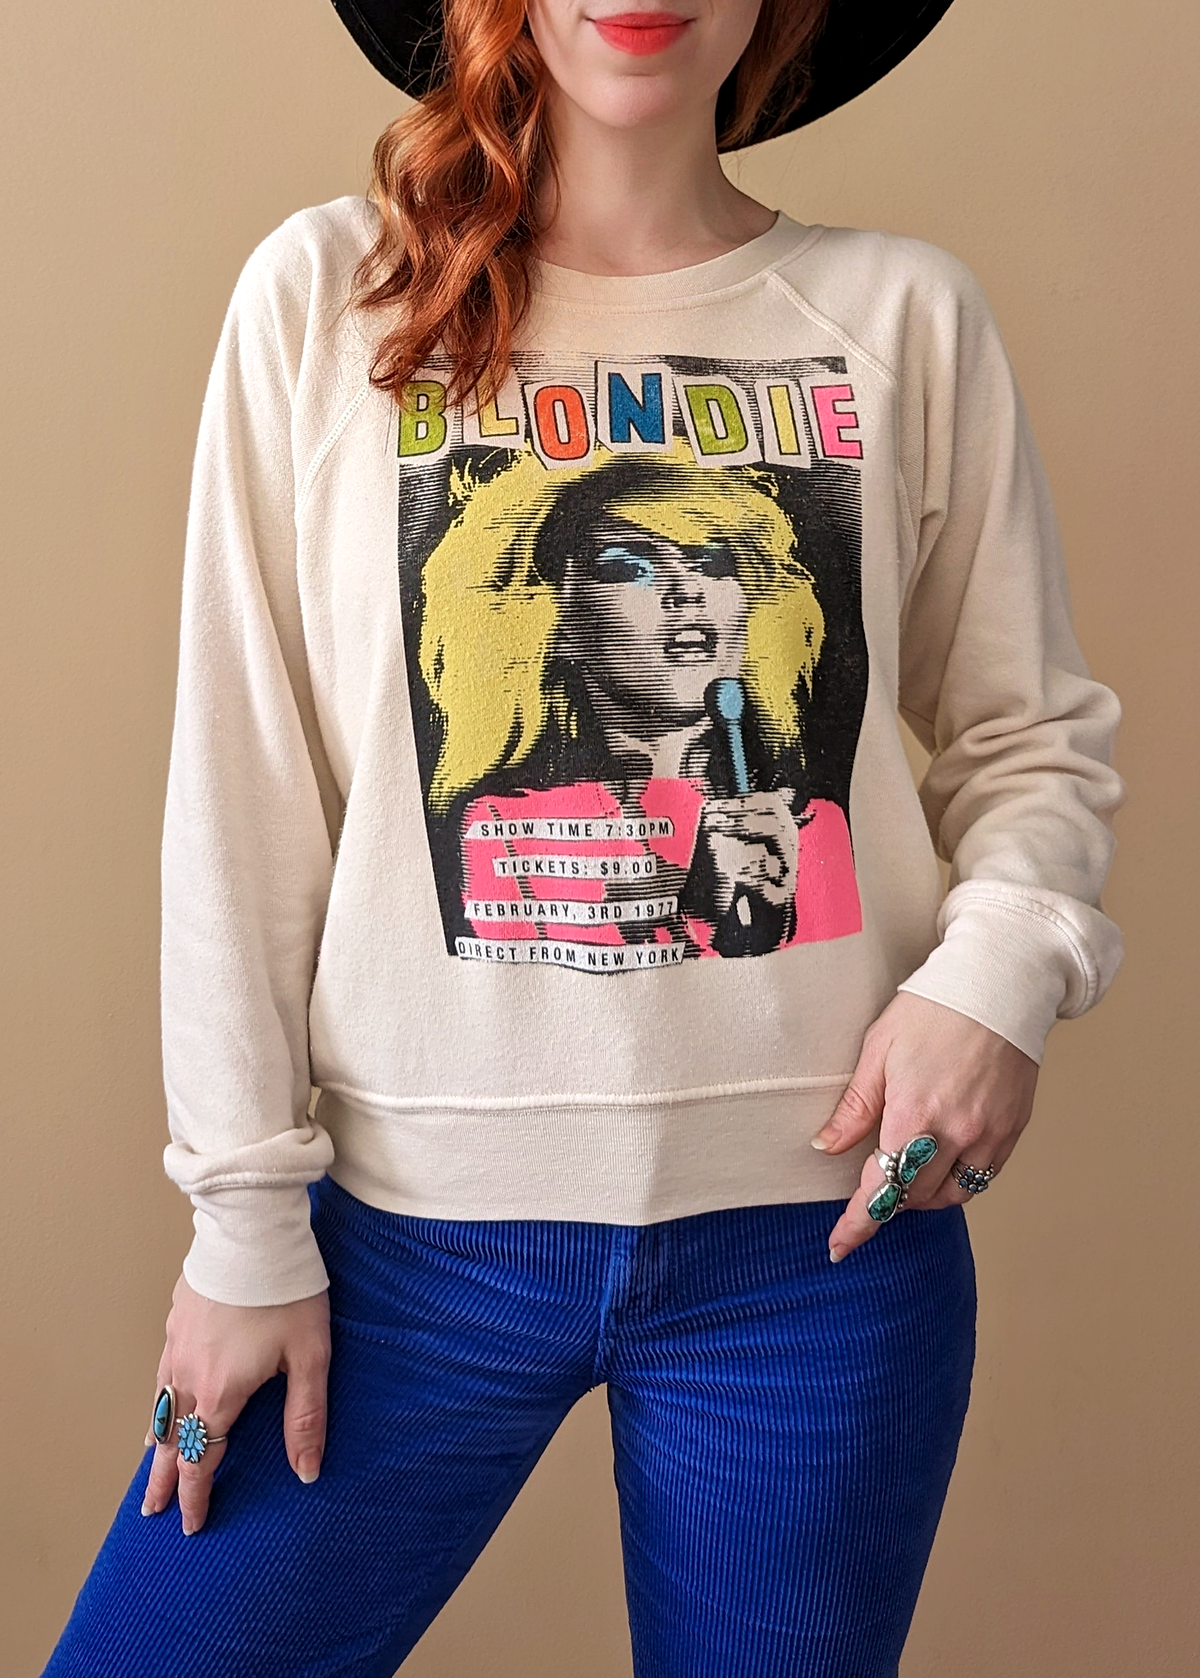 Daydreamer LA Cream Dirty White Raglan Crew Neck Sweatshirt with colorful Blondie 1977 Showtime graphics at front, made in California and officially licensed